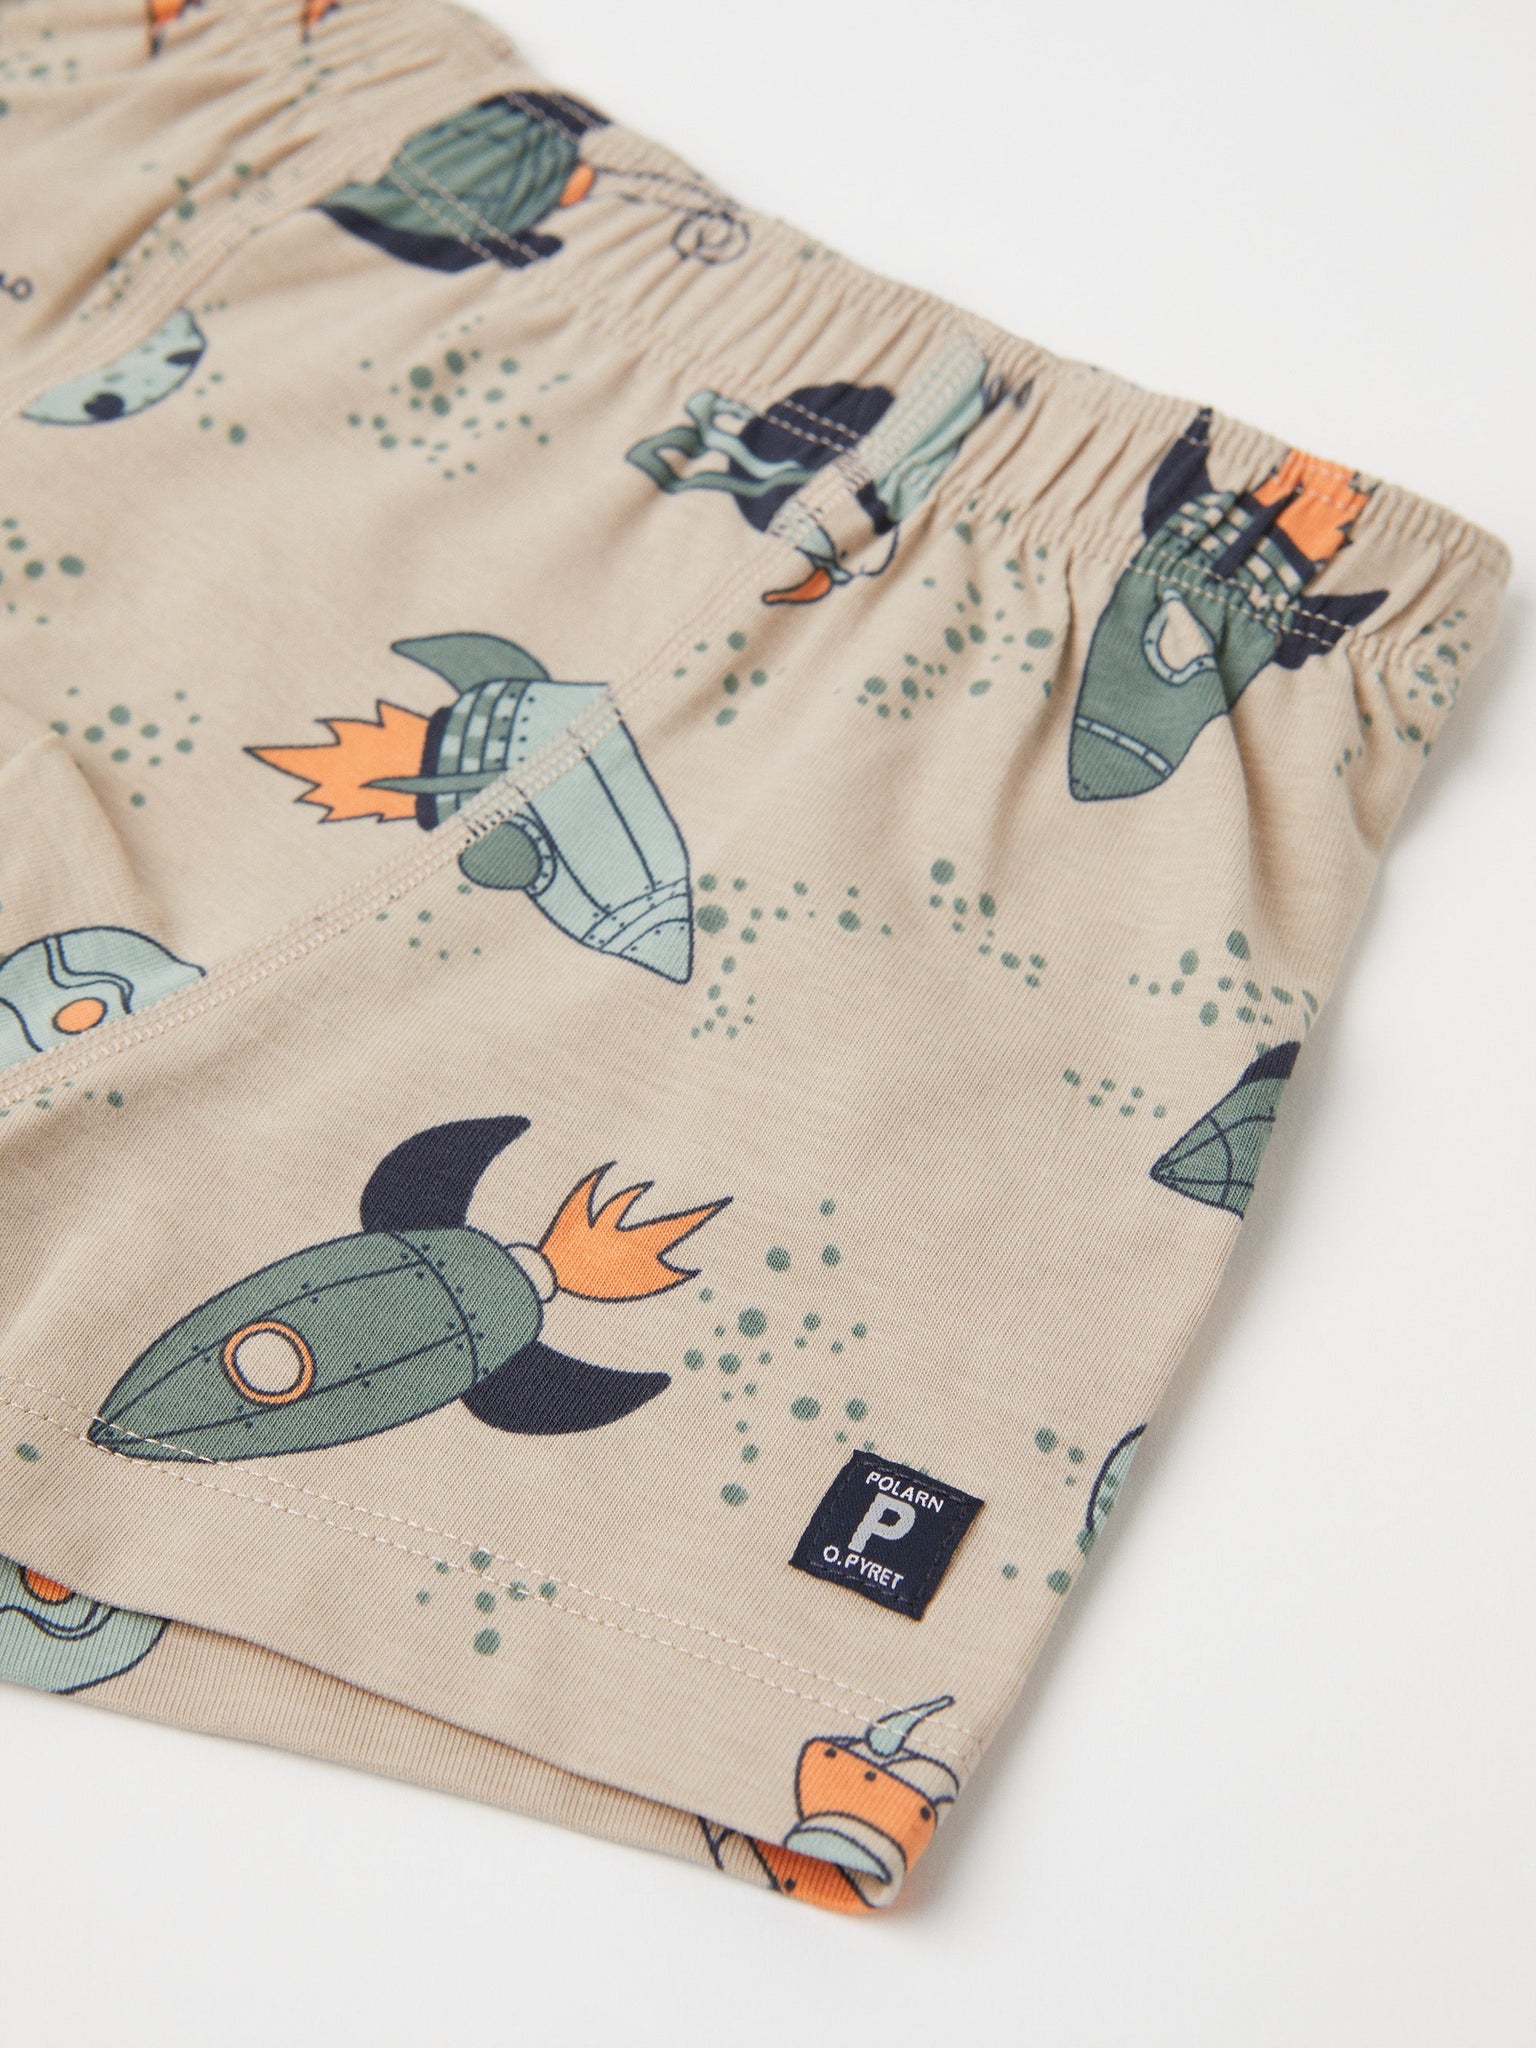 Organic Cotton Boys Boxer Shorts from the Polarn O. Pyret kidswear collection. Clothes made using sustainably sourced materials.